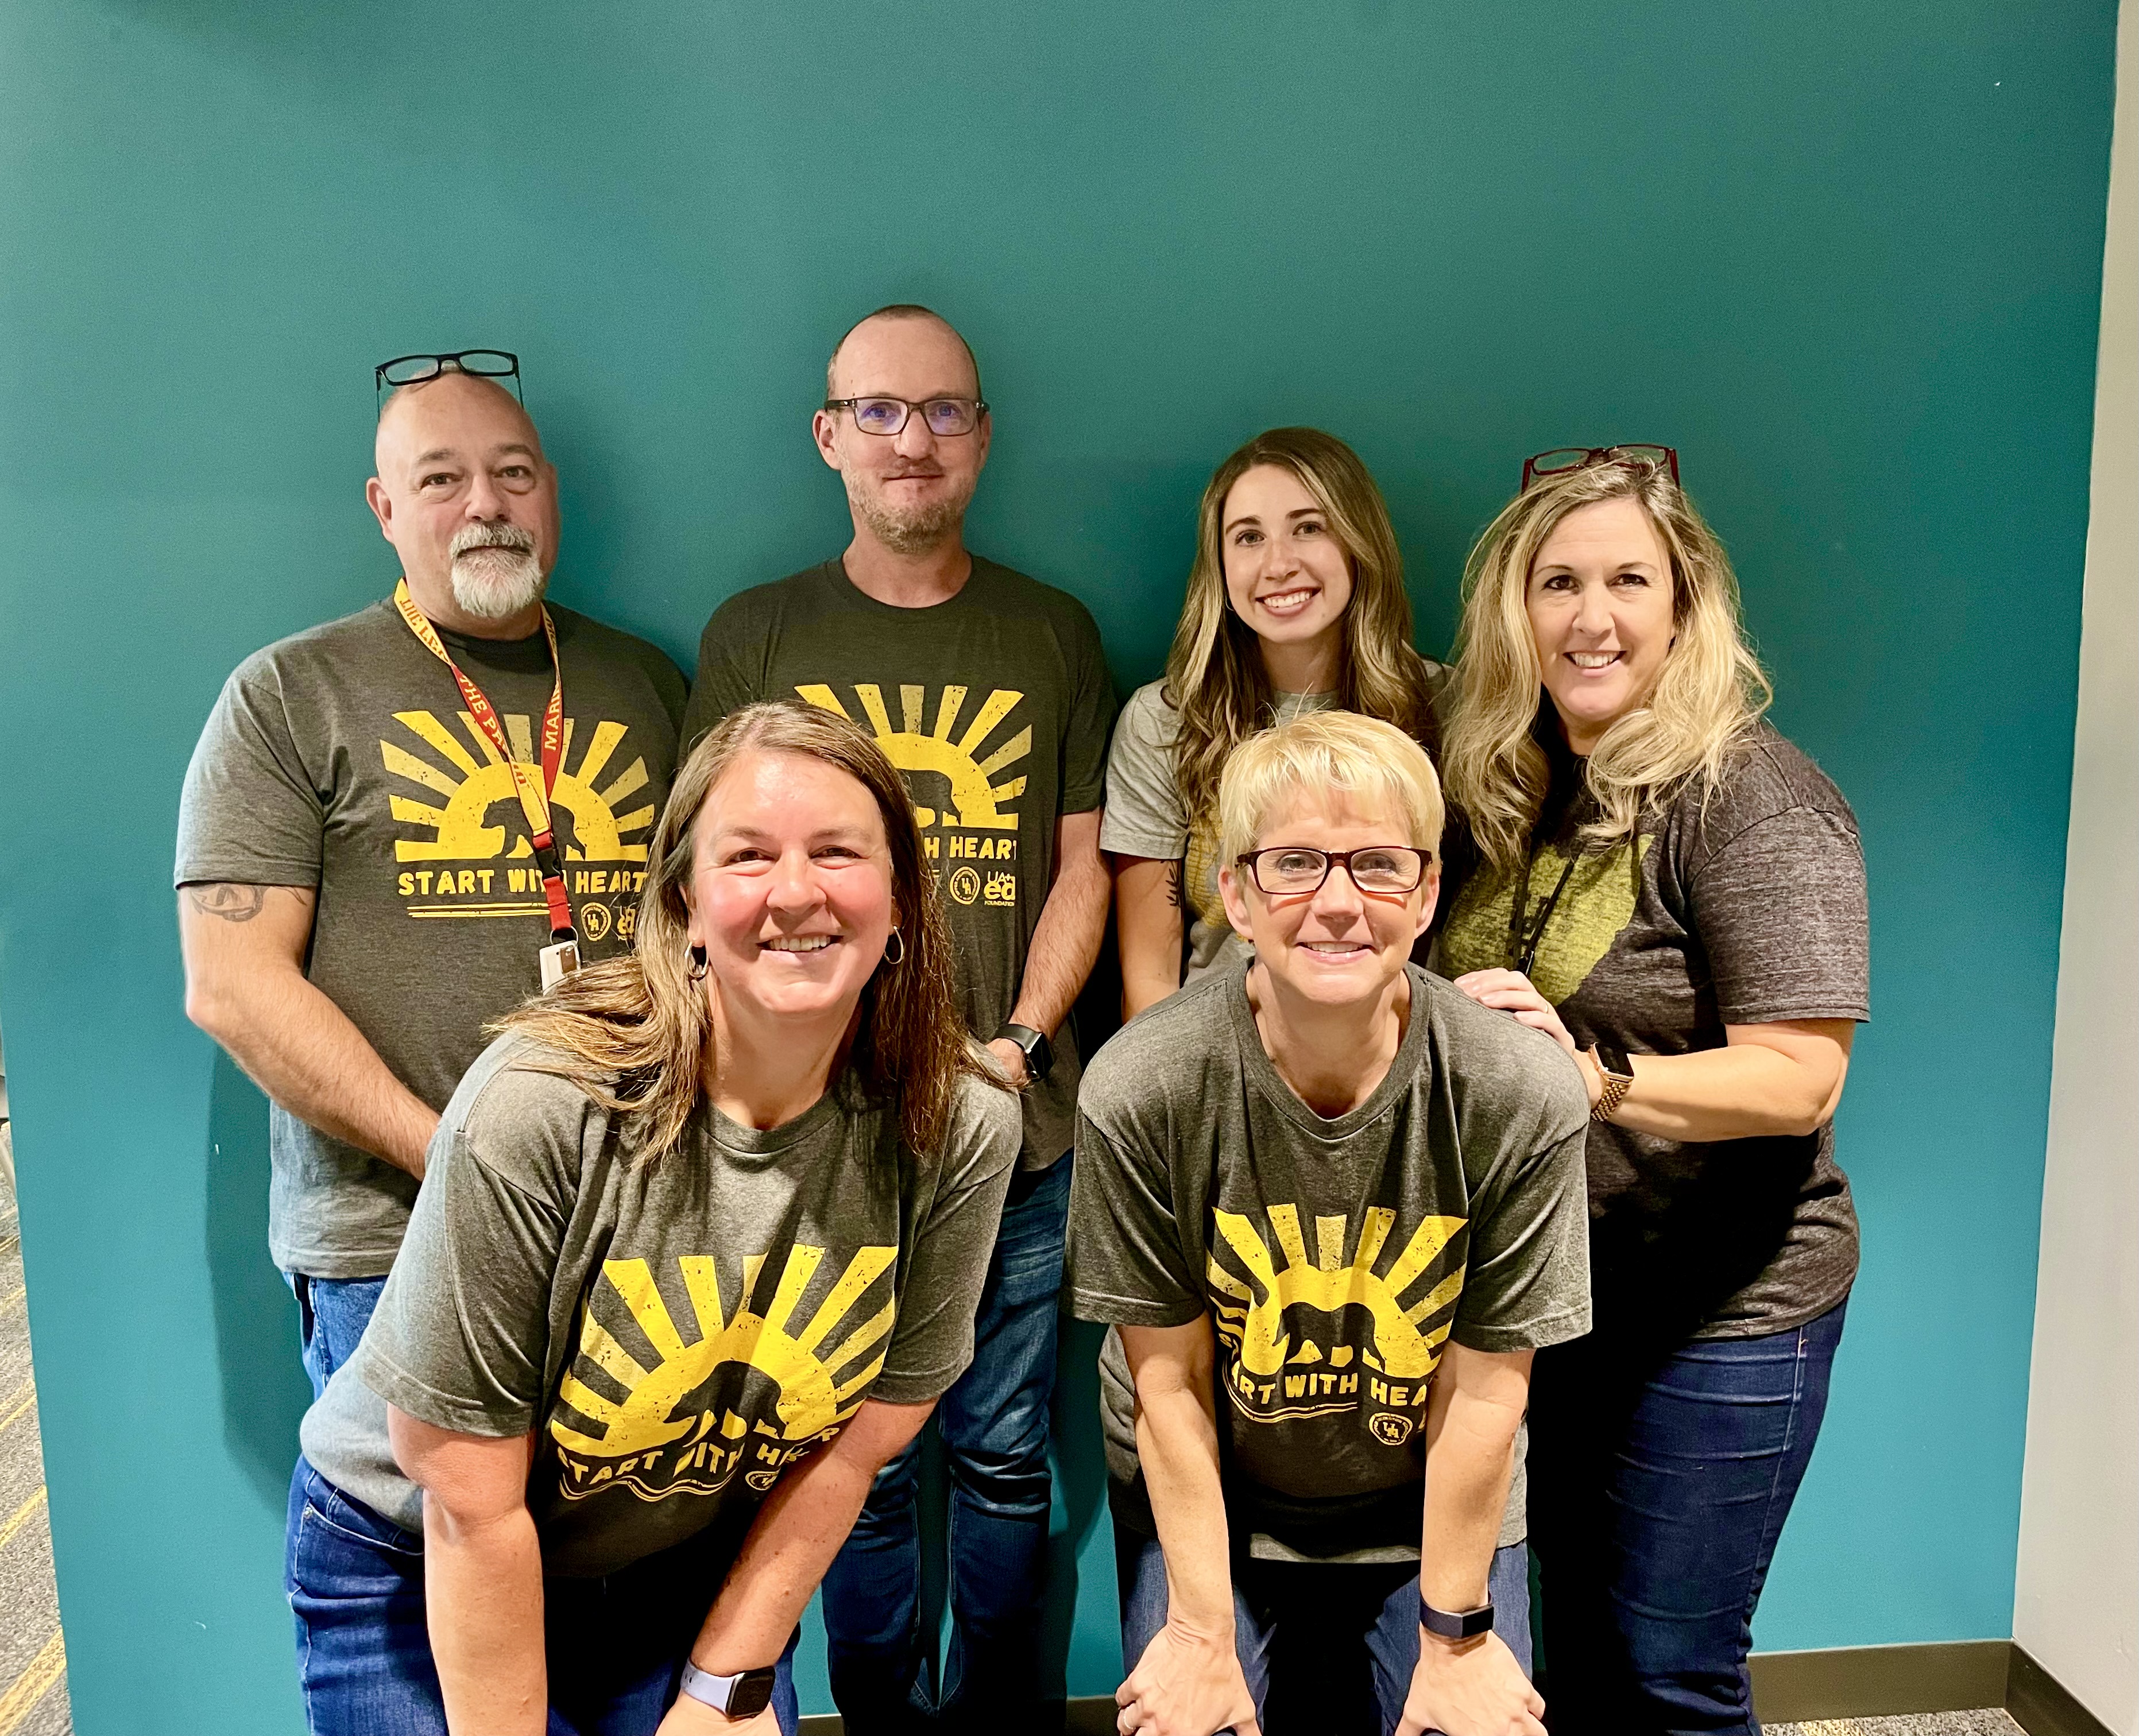 The six Upper Arlington High School counselors posing for a photo in gray shirts in front of a bluish-green background